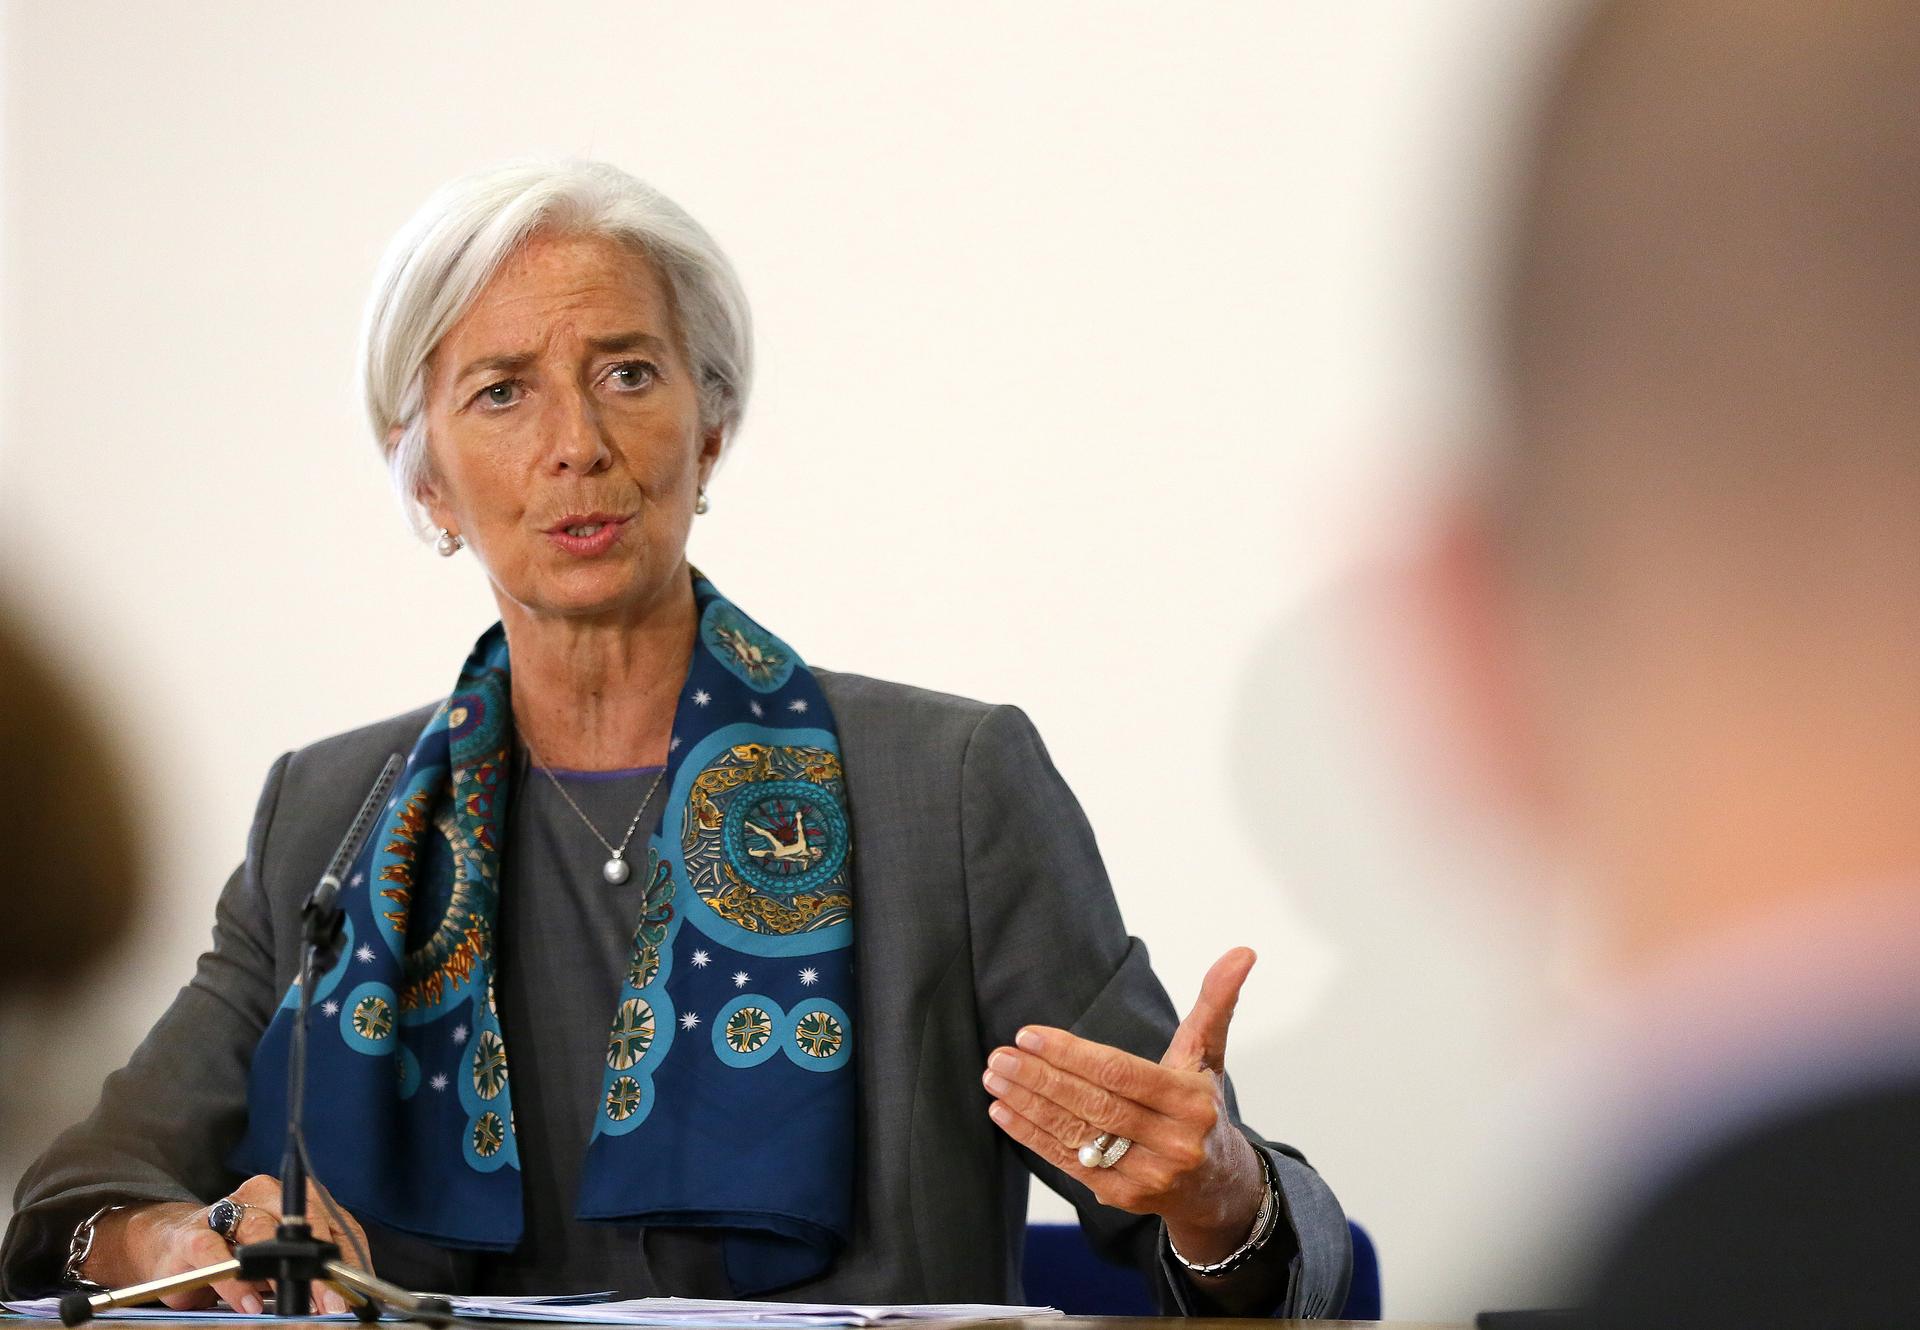 IMF Managing Director Christine Lagarde prepares to host a news conference at the Treasury, in London June 6, 2014. IMF Managing Director Christine Lagarde ruled herself out of the running for the job of European Commission president on Friday.